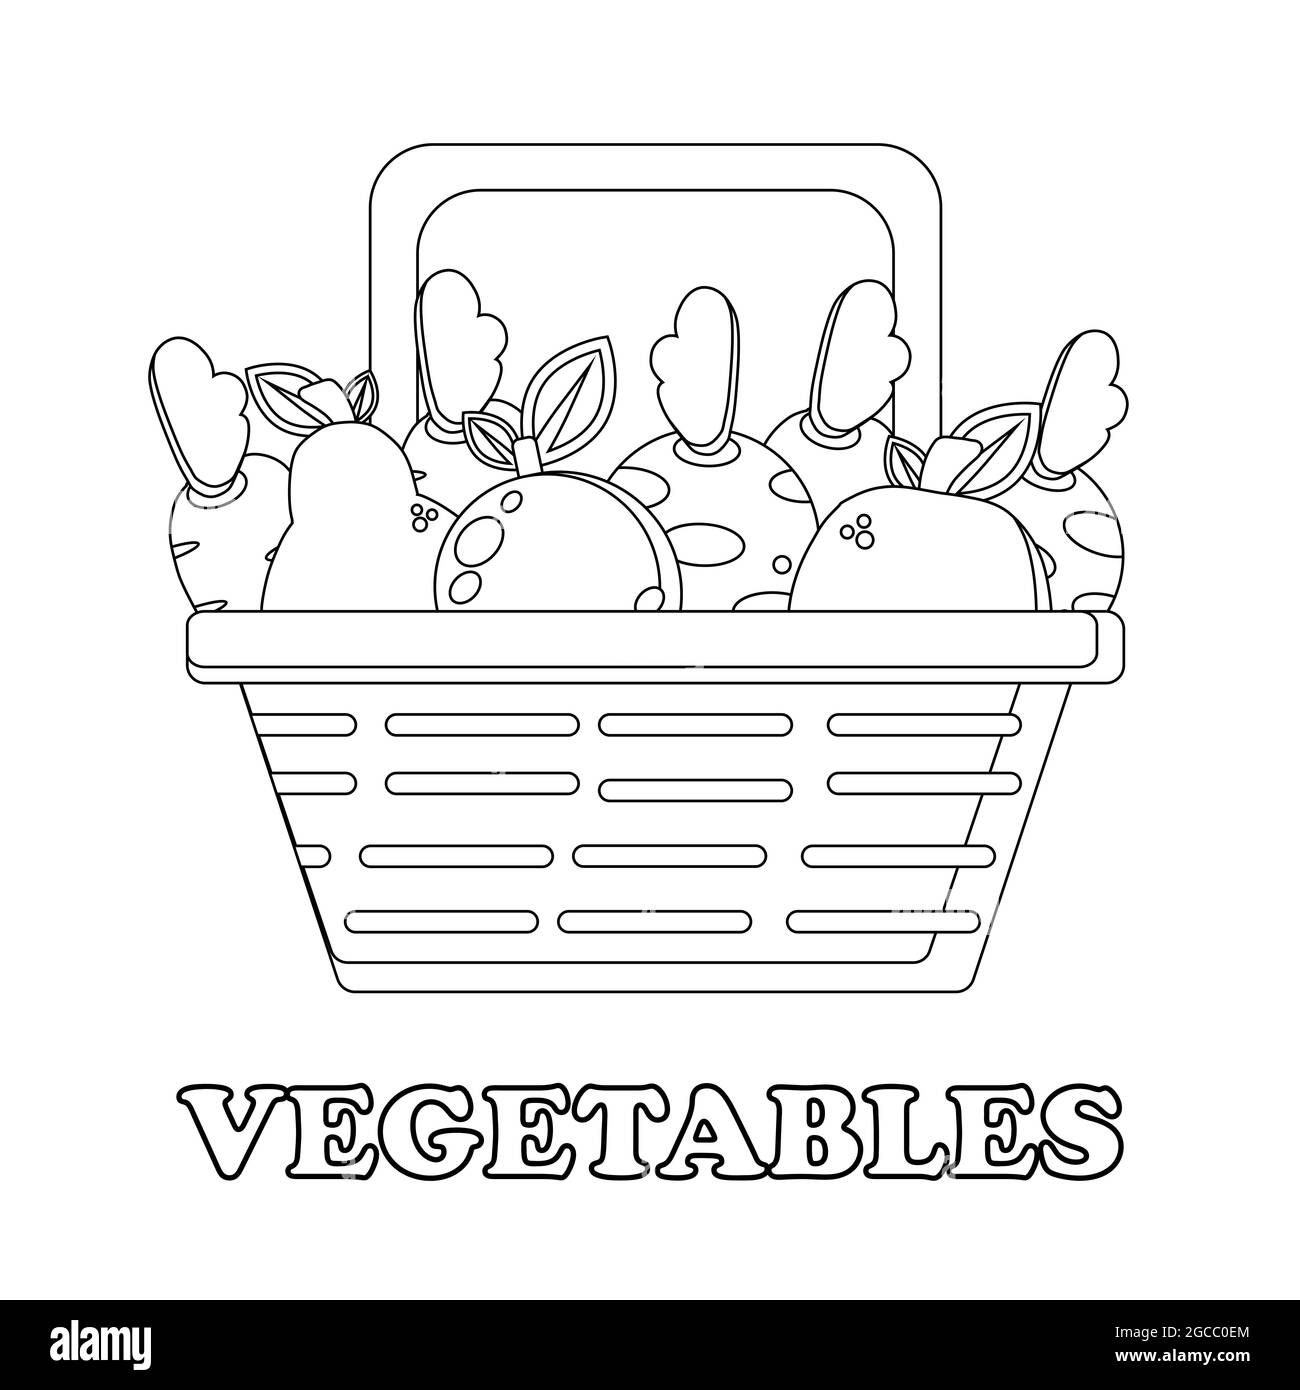 vegetable on the basket coloring page. healthy food coloring page for children . on white background Stock Photo